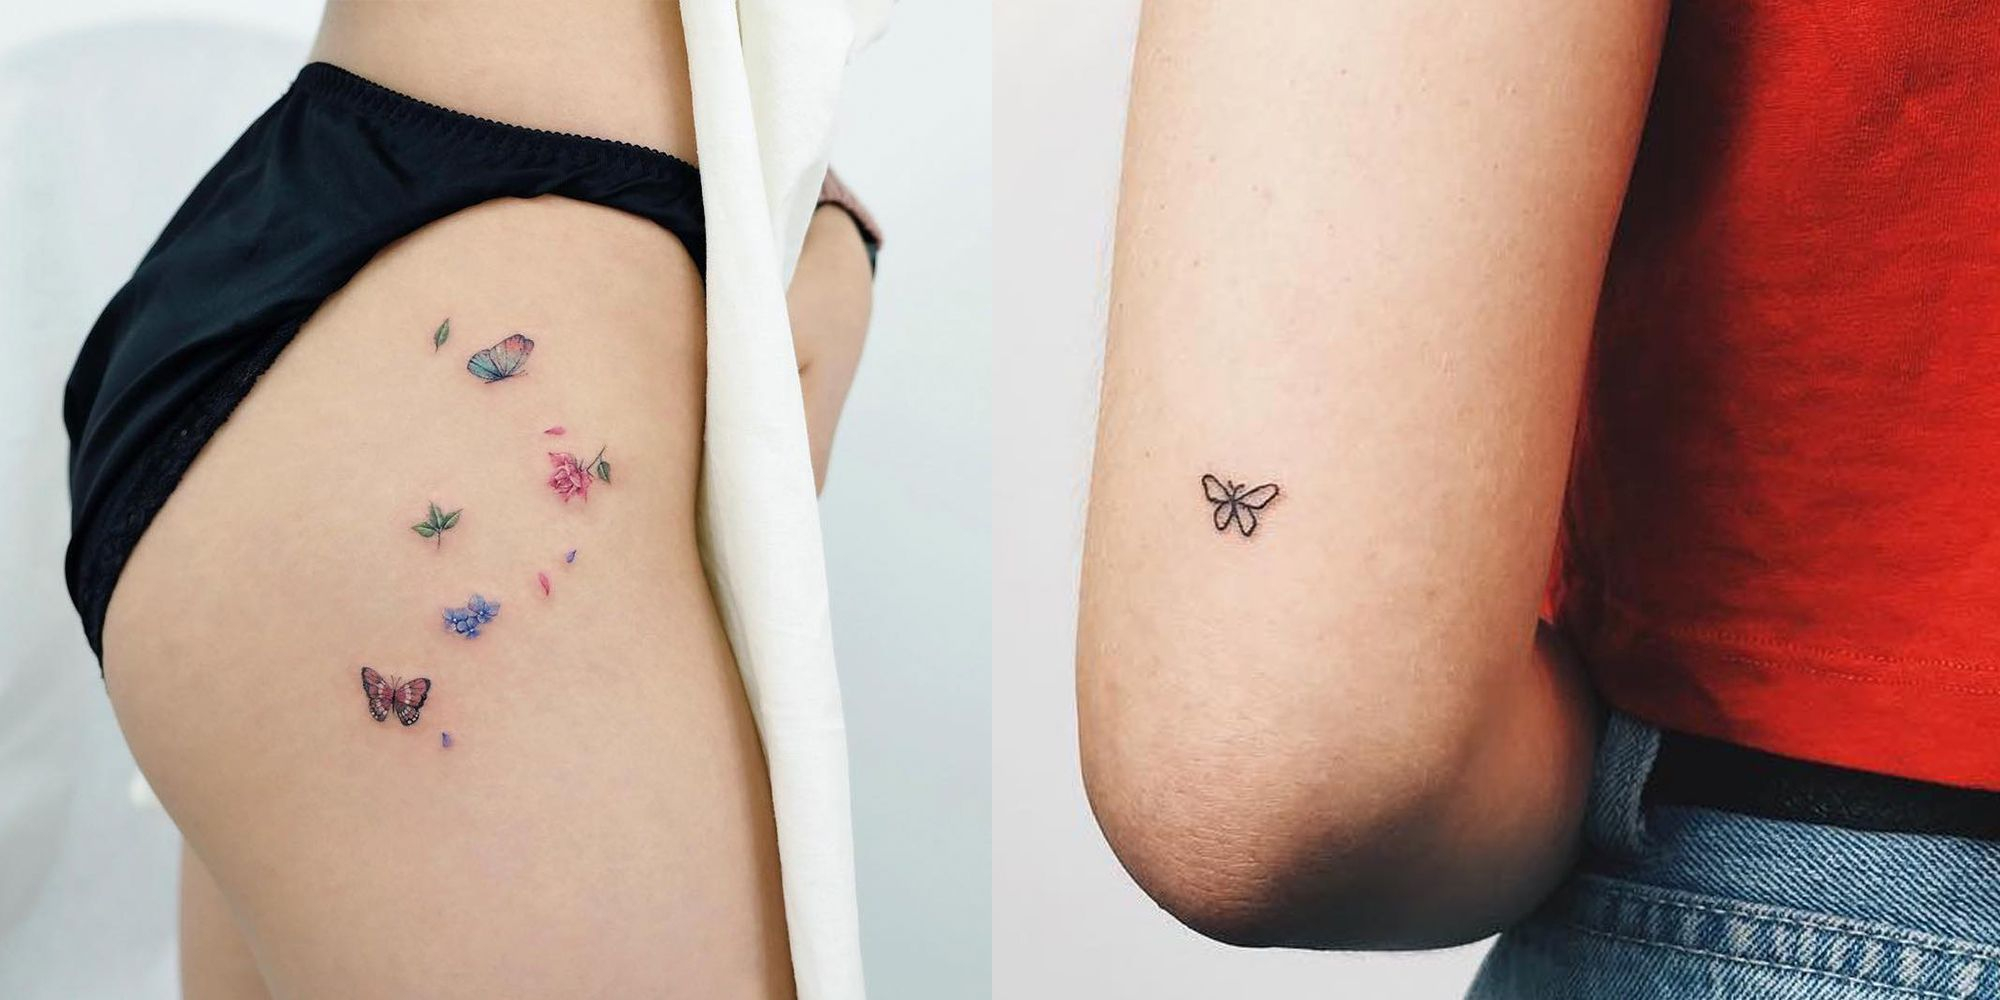 17 Butterfly Tattoo Ideas That Are Pretty Not Tacky Pictures Of in dimensions 2000 X 1000